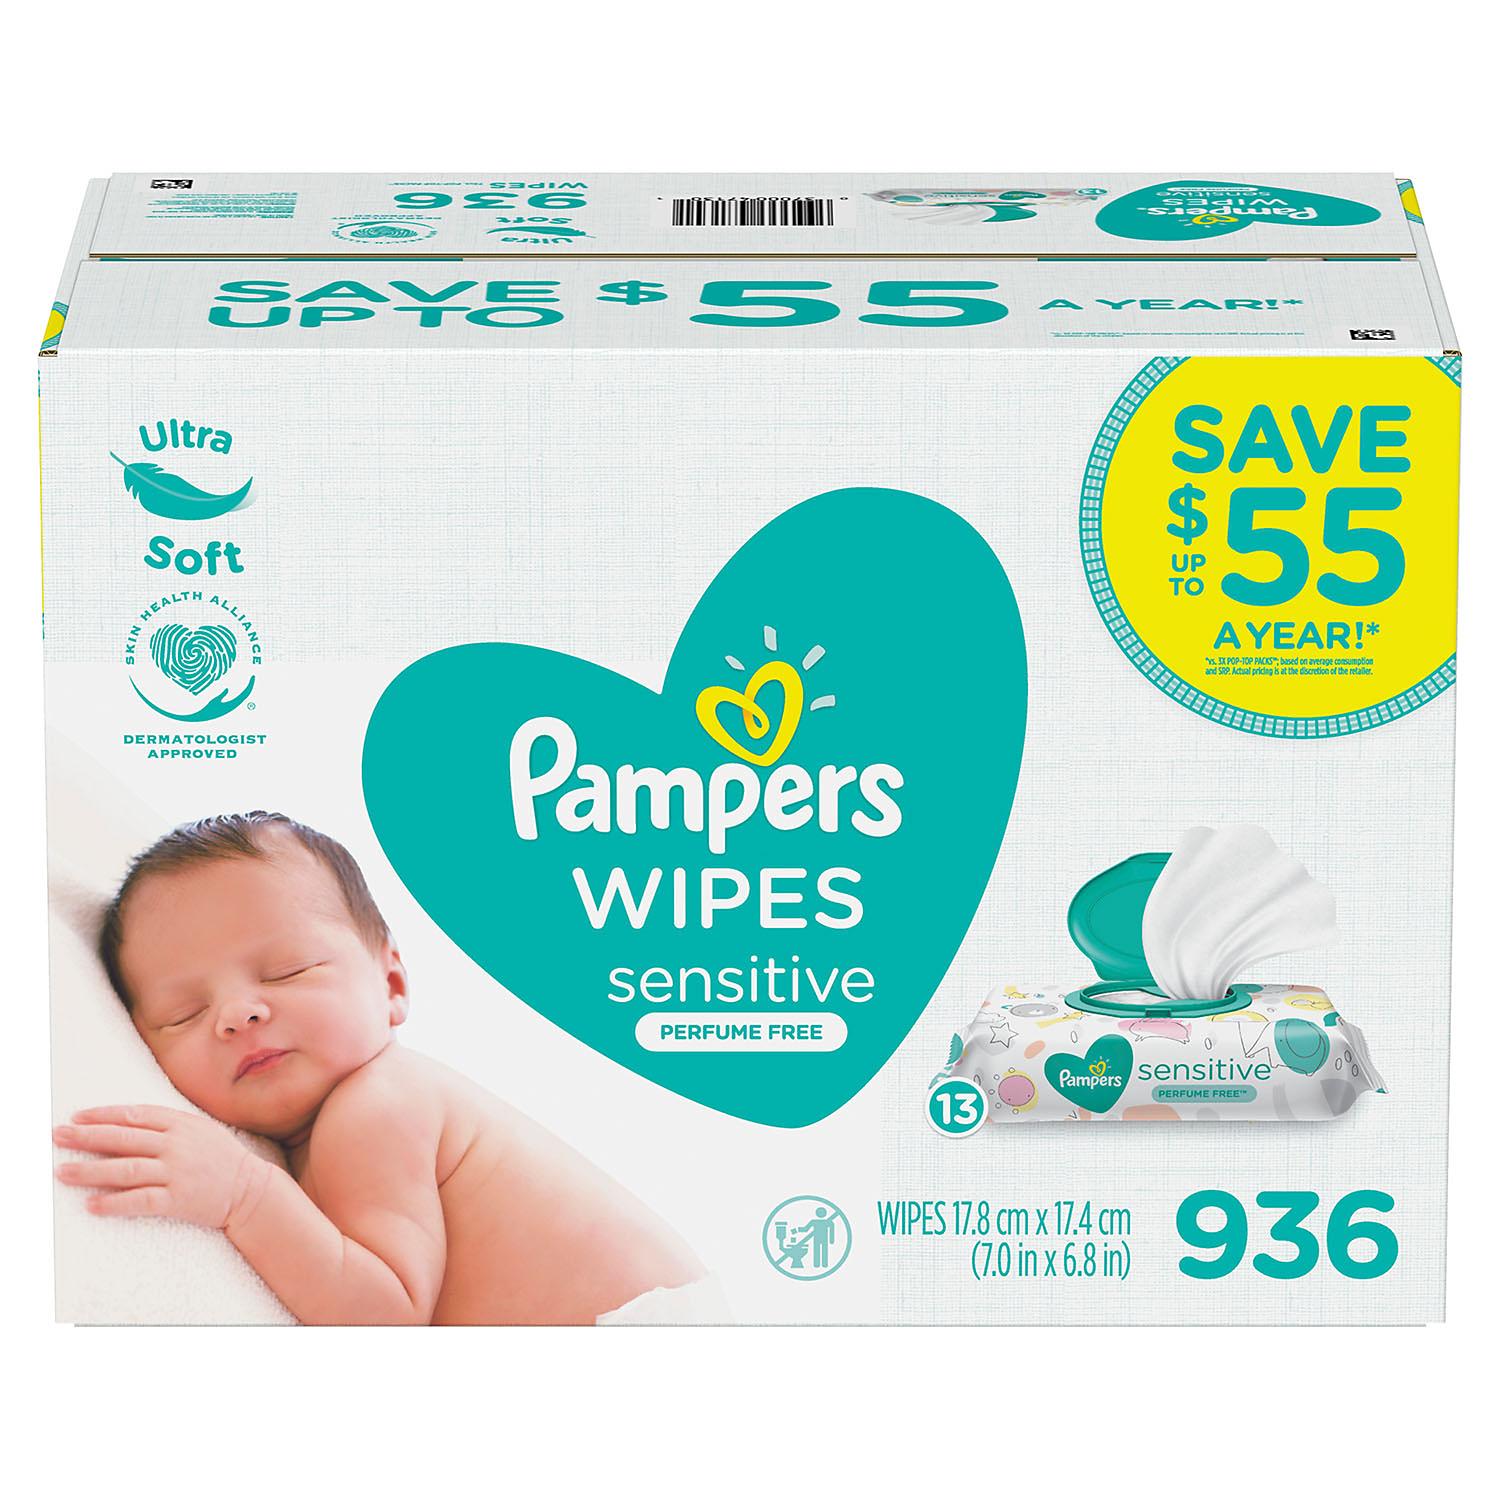 Afrikaanse Orthodox poll Pampers Sensitive Baby Wipes (936 ct.) – My Kosher Cart